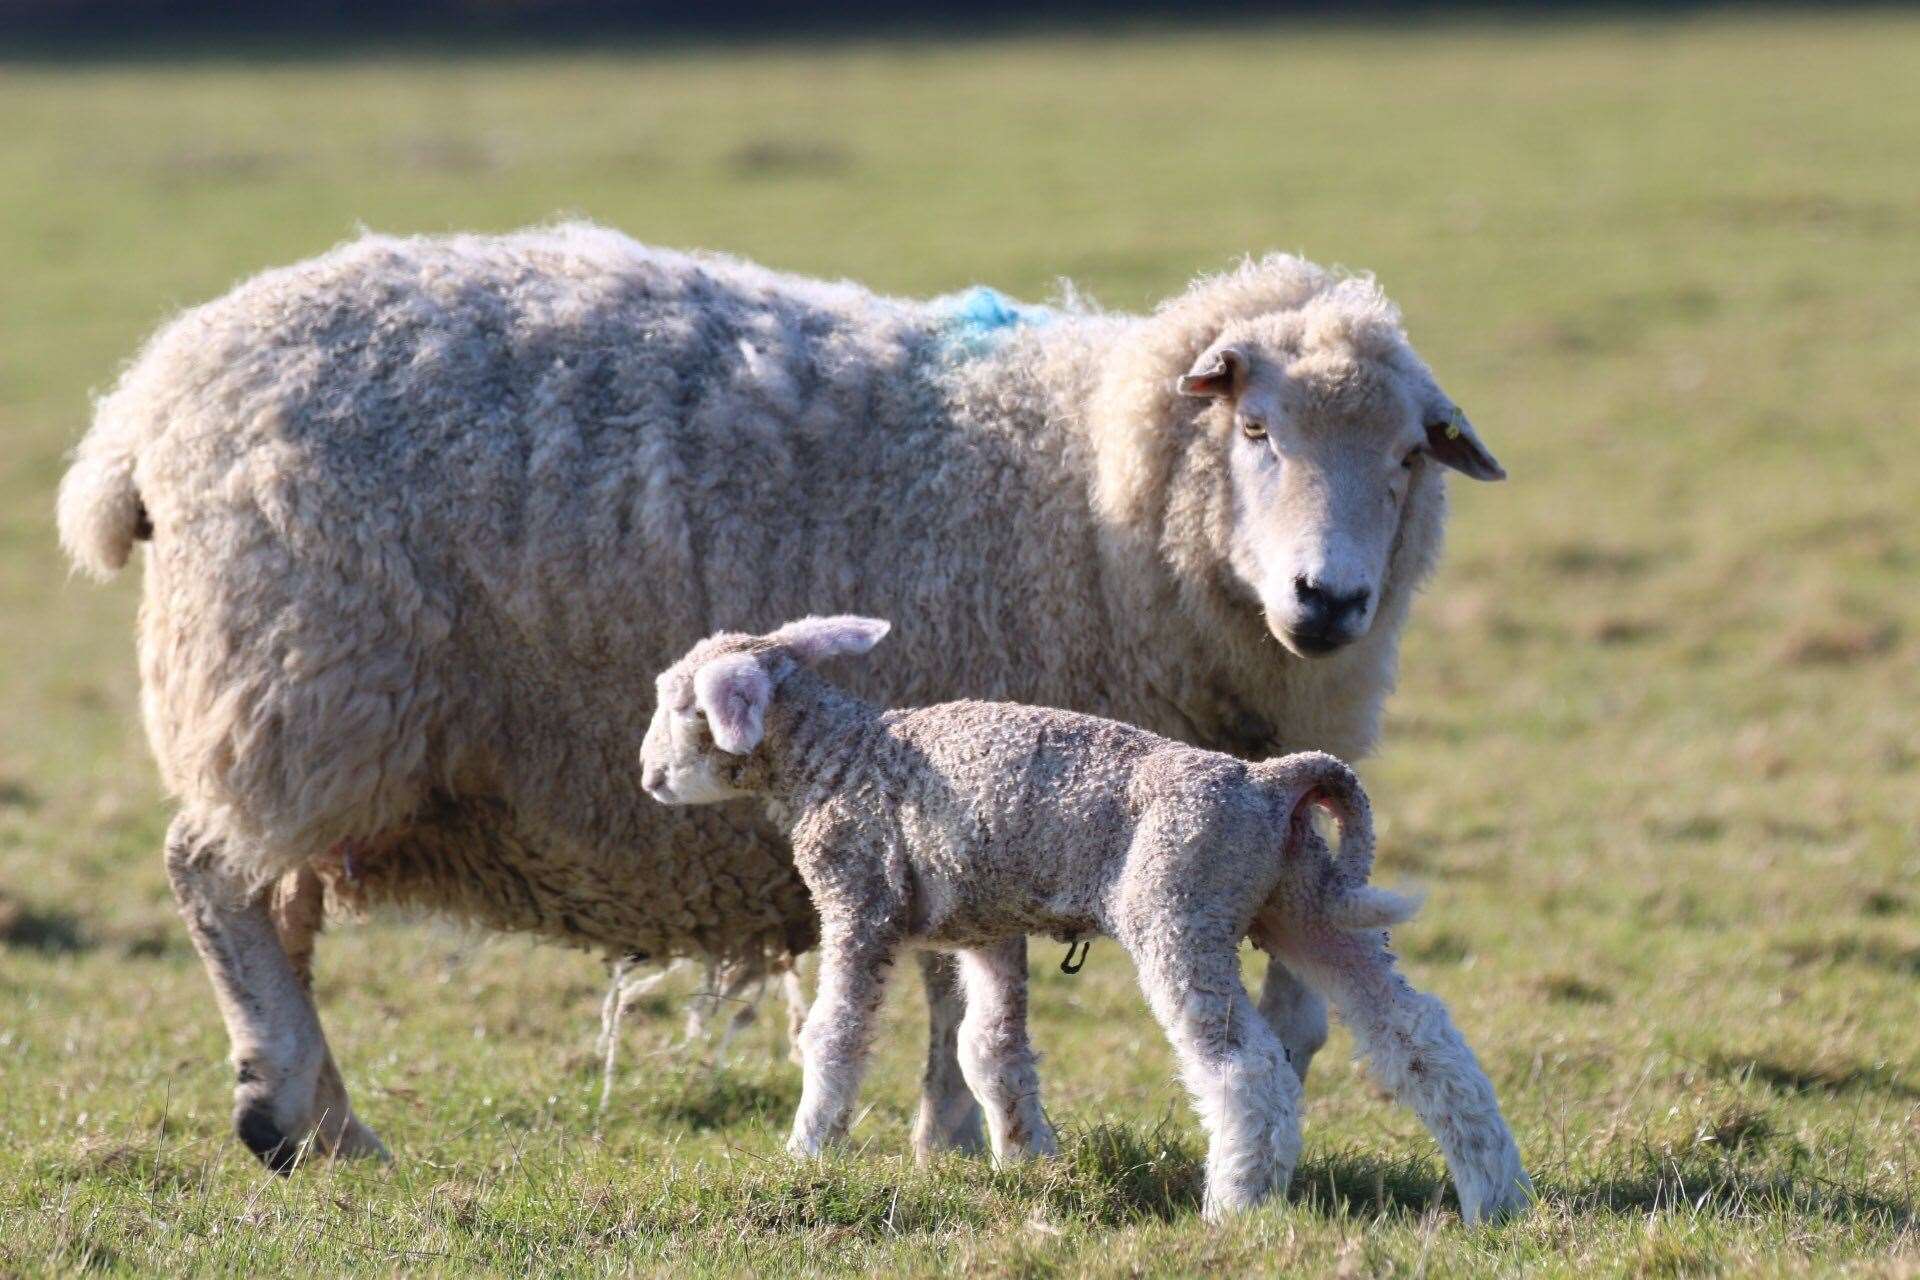 Lambing season usually takes place between February and April